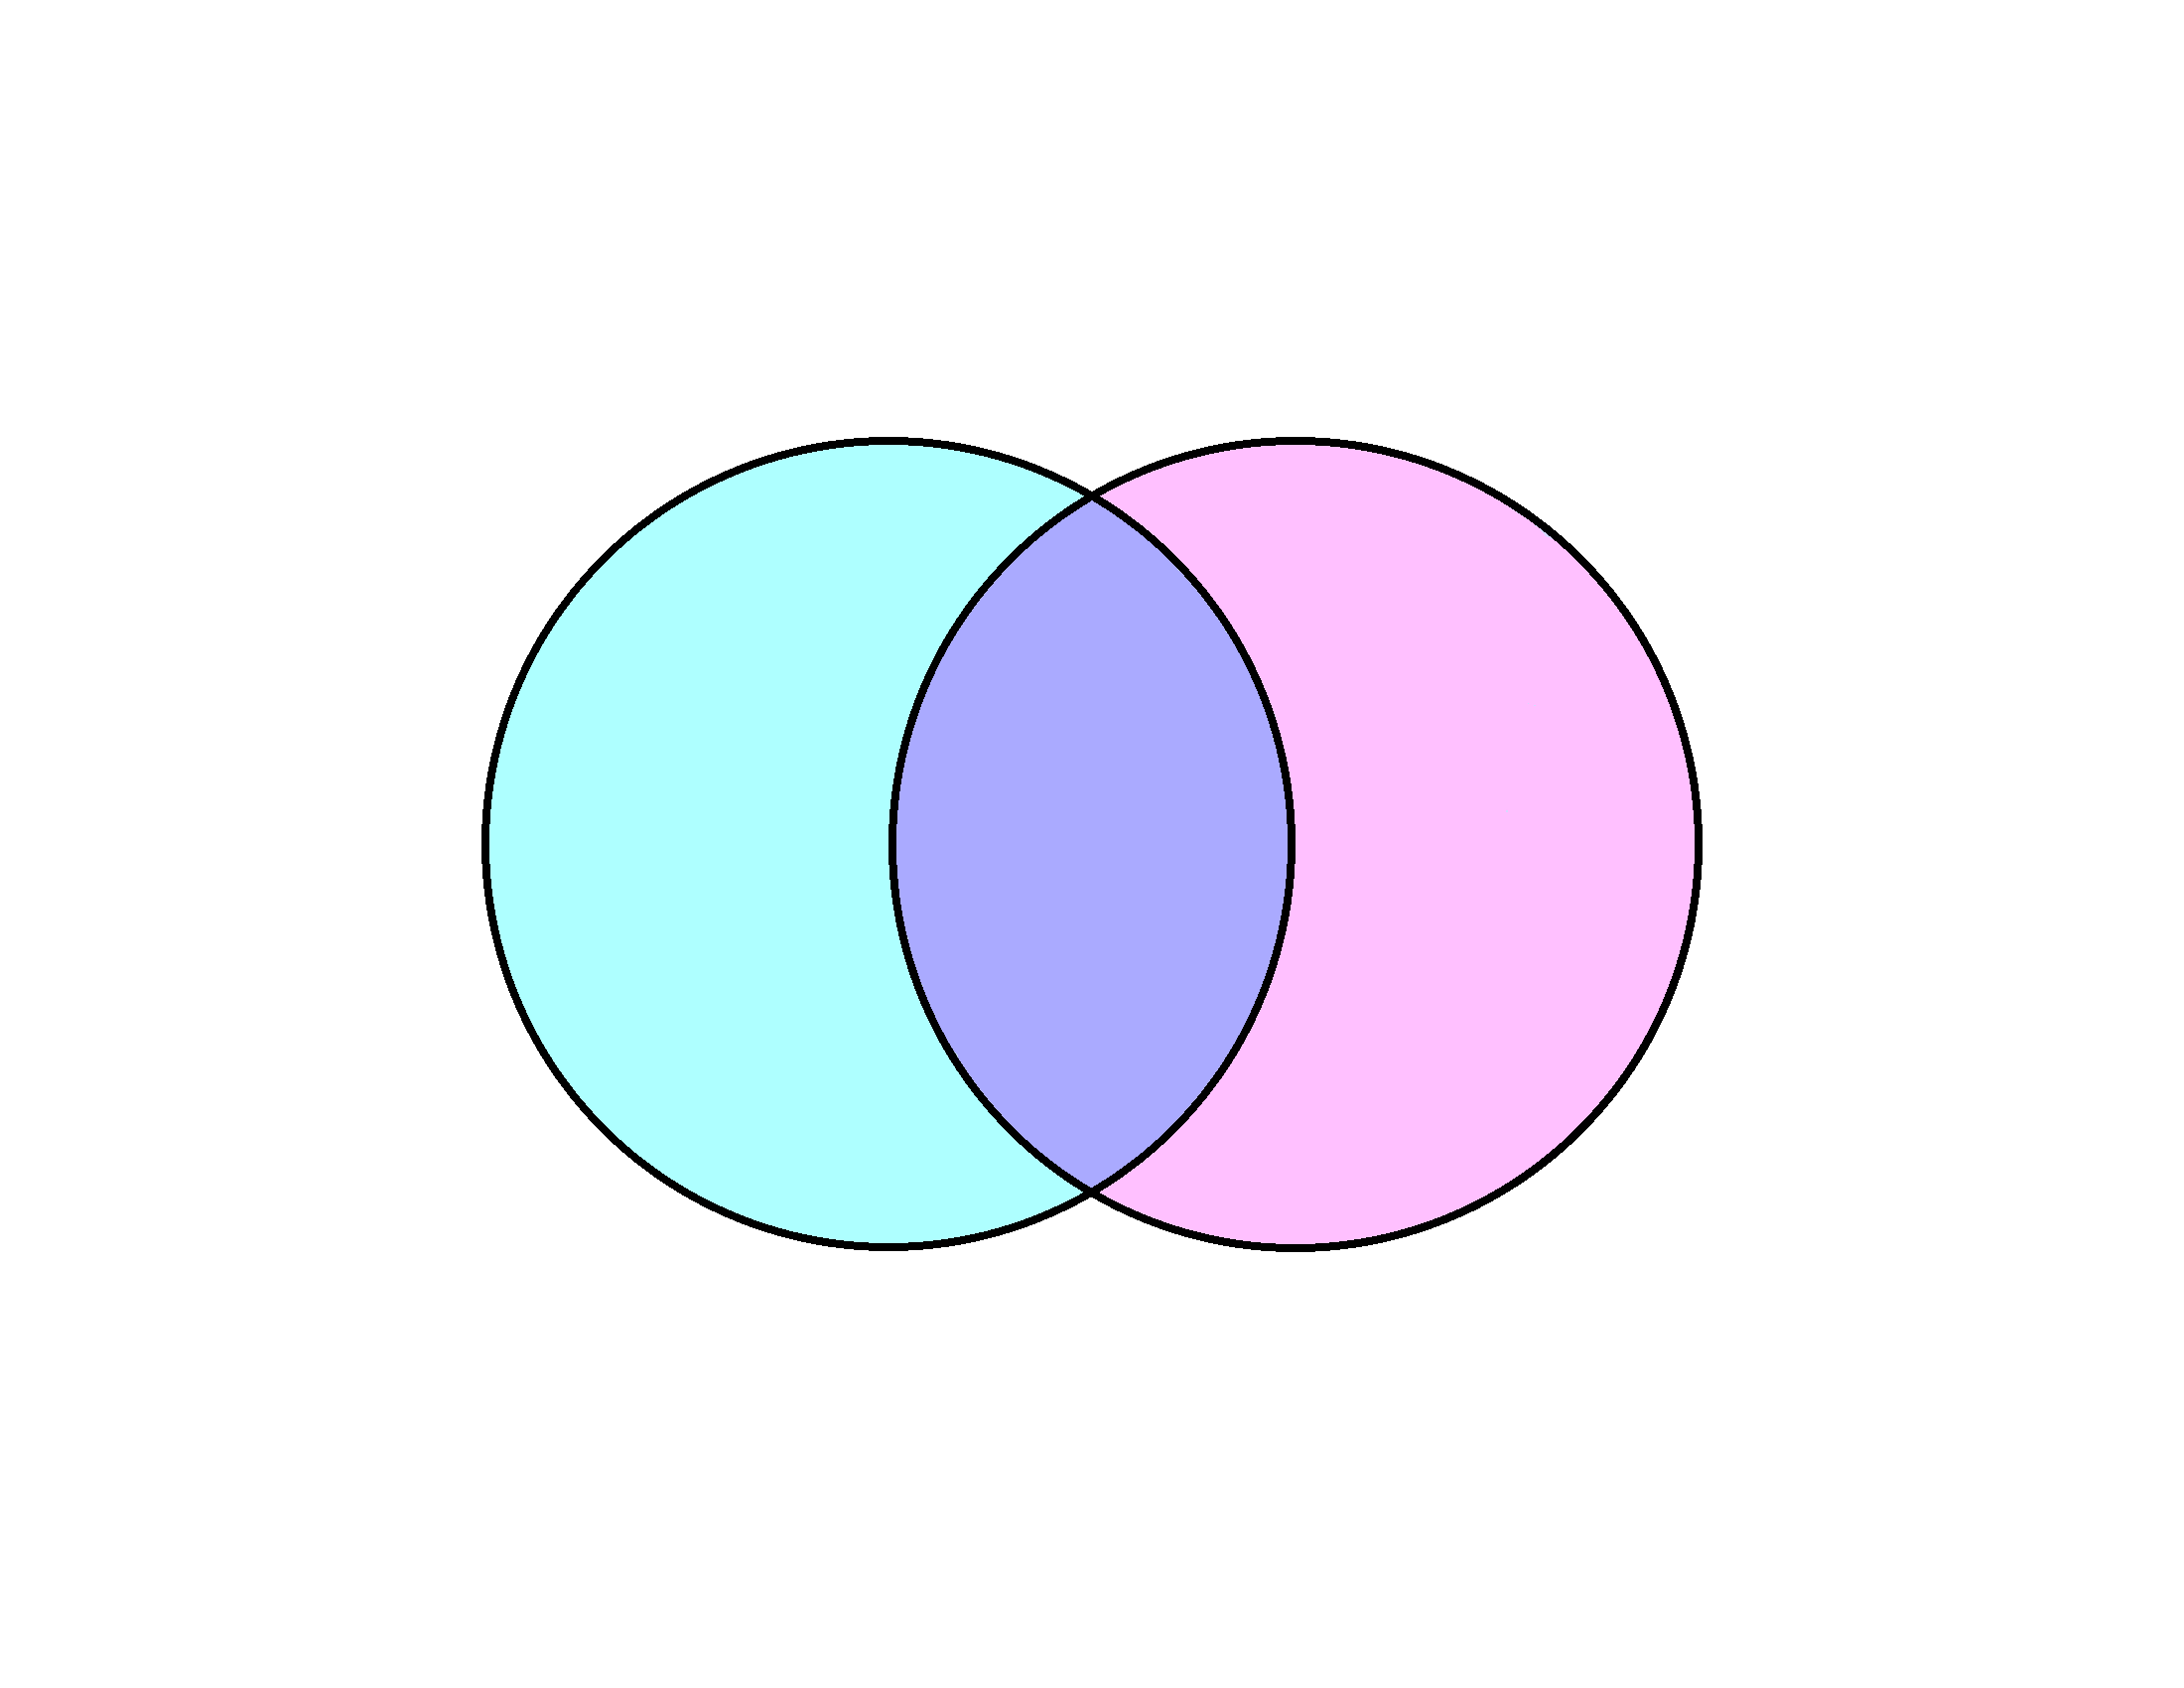 Venn 2 Sets Joined Filled in button